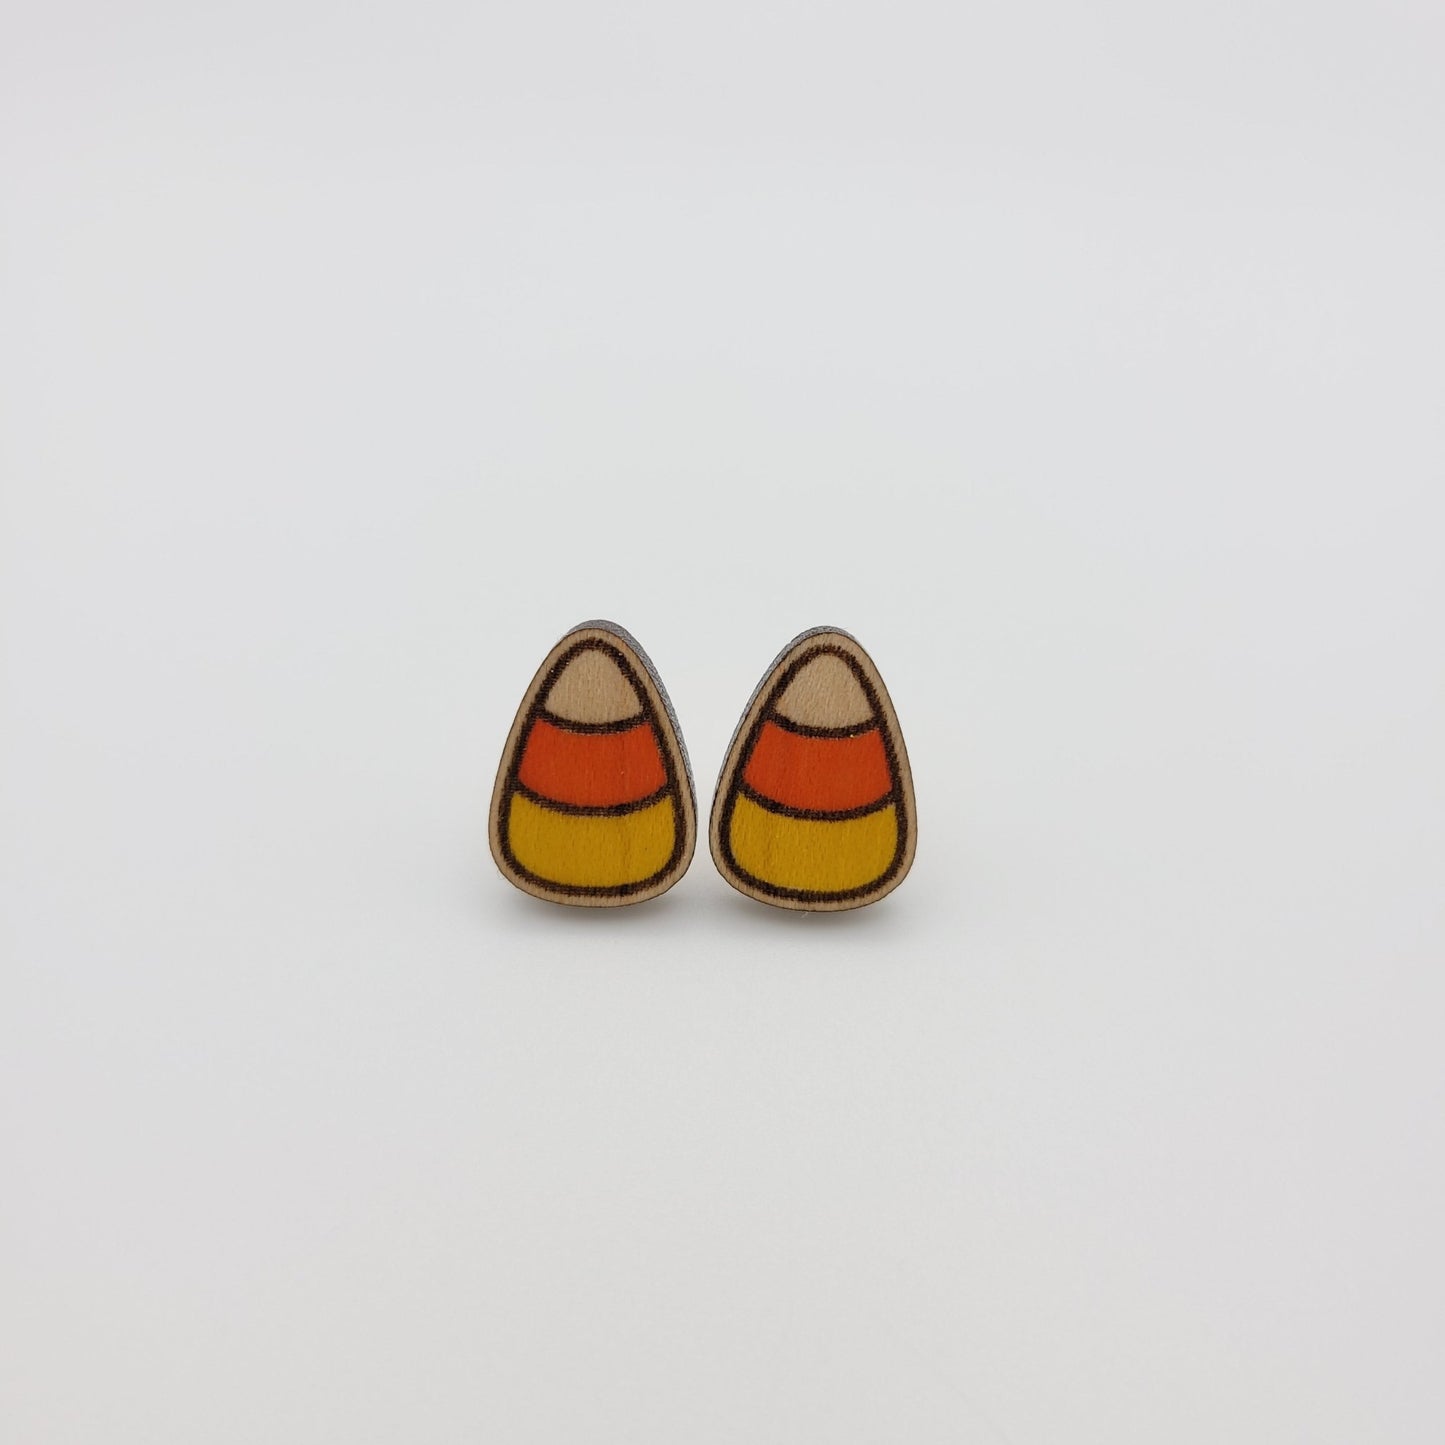 Hand Painted Candy Corn Stud Earrings - 4 Arrows Creations